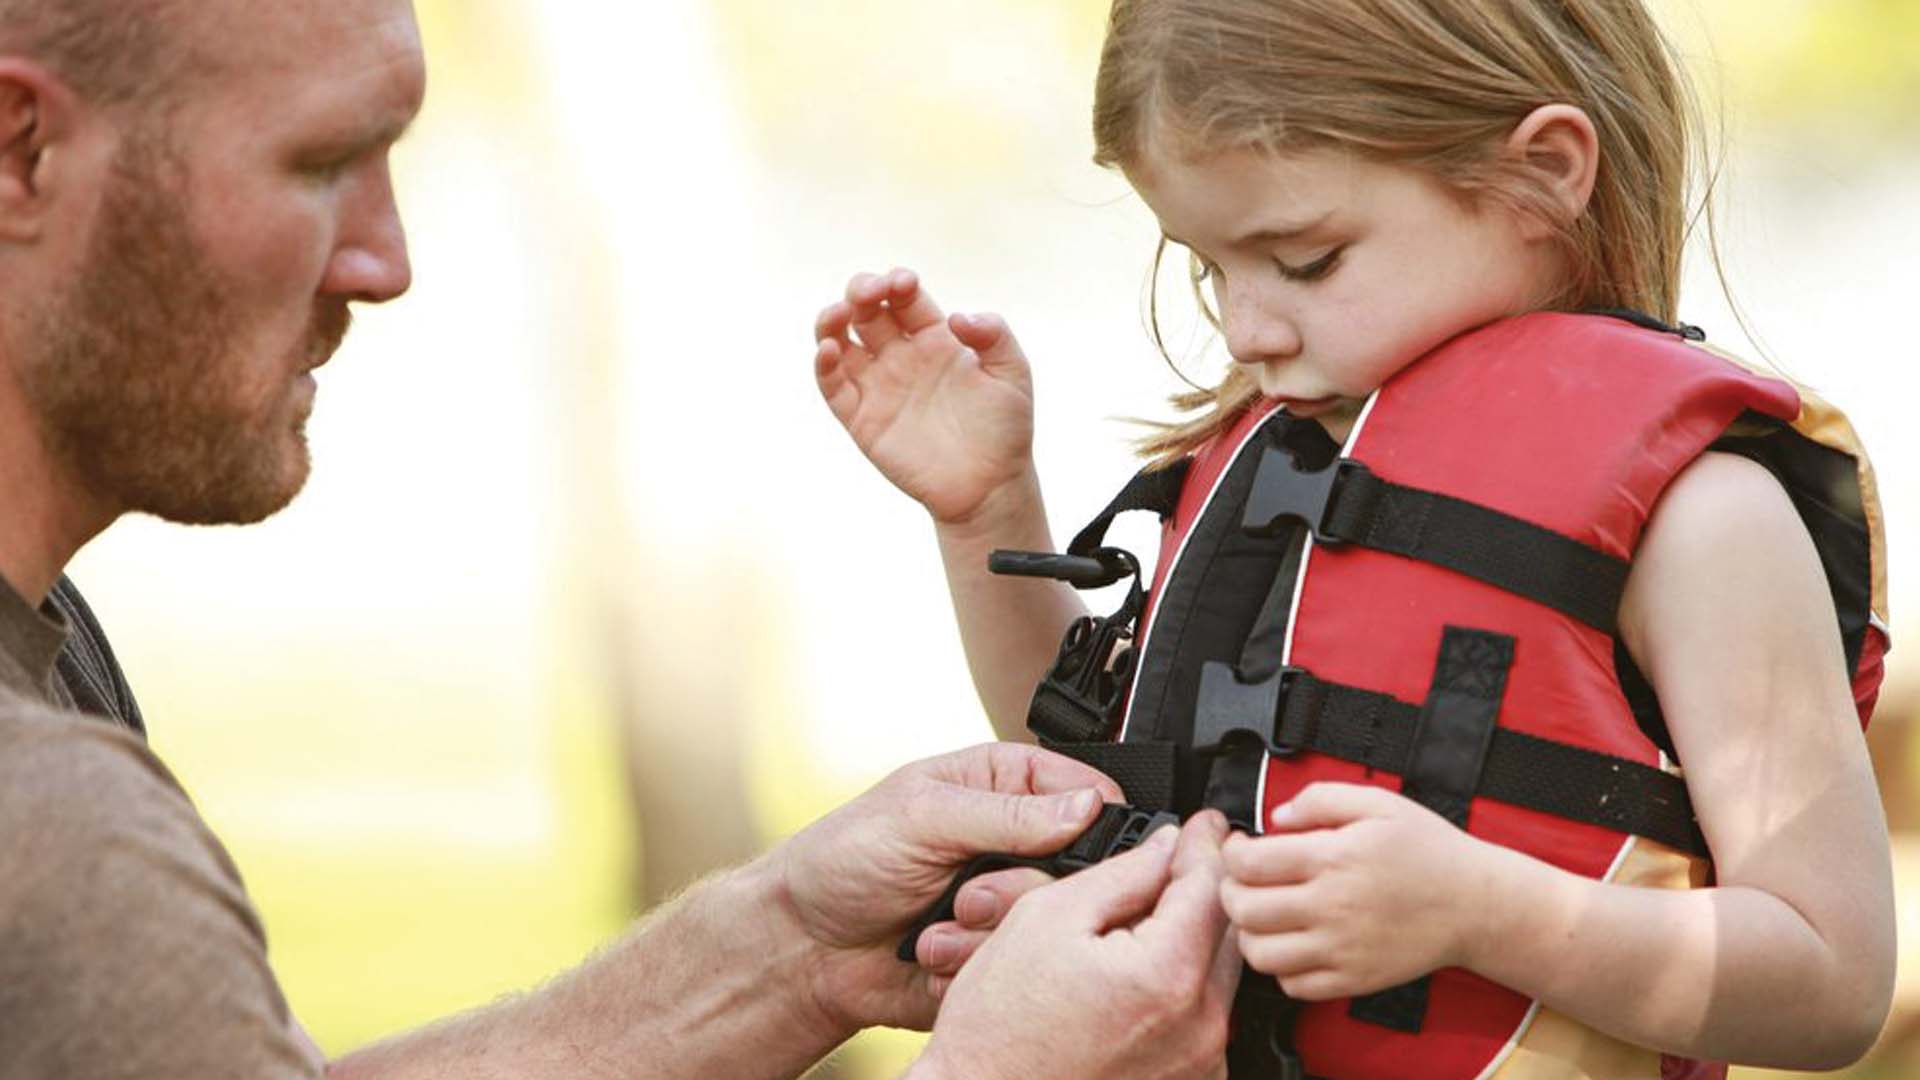 man giving a life jacket on a child